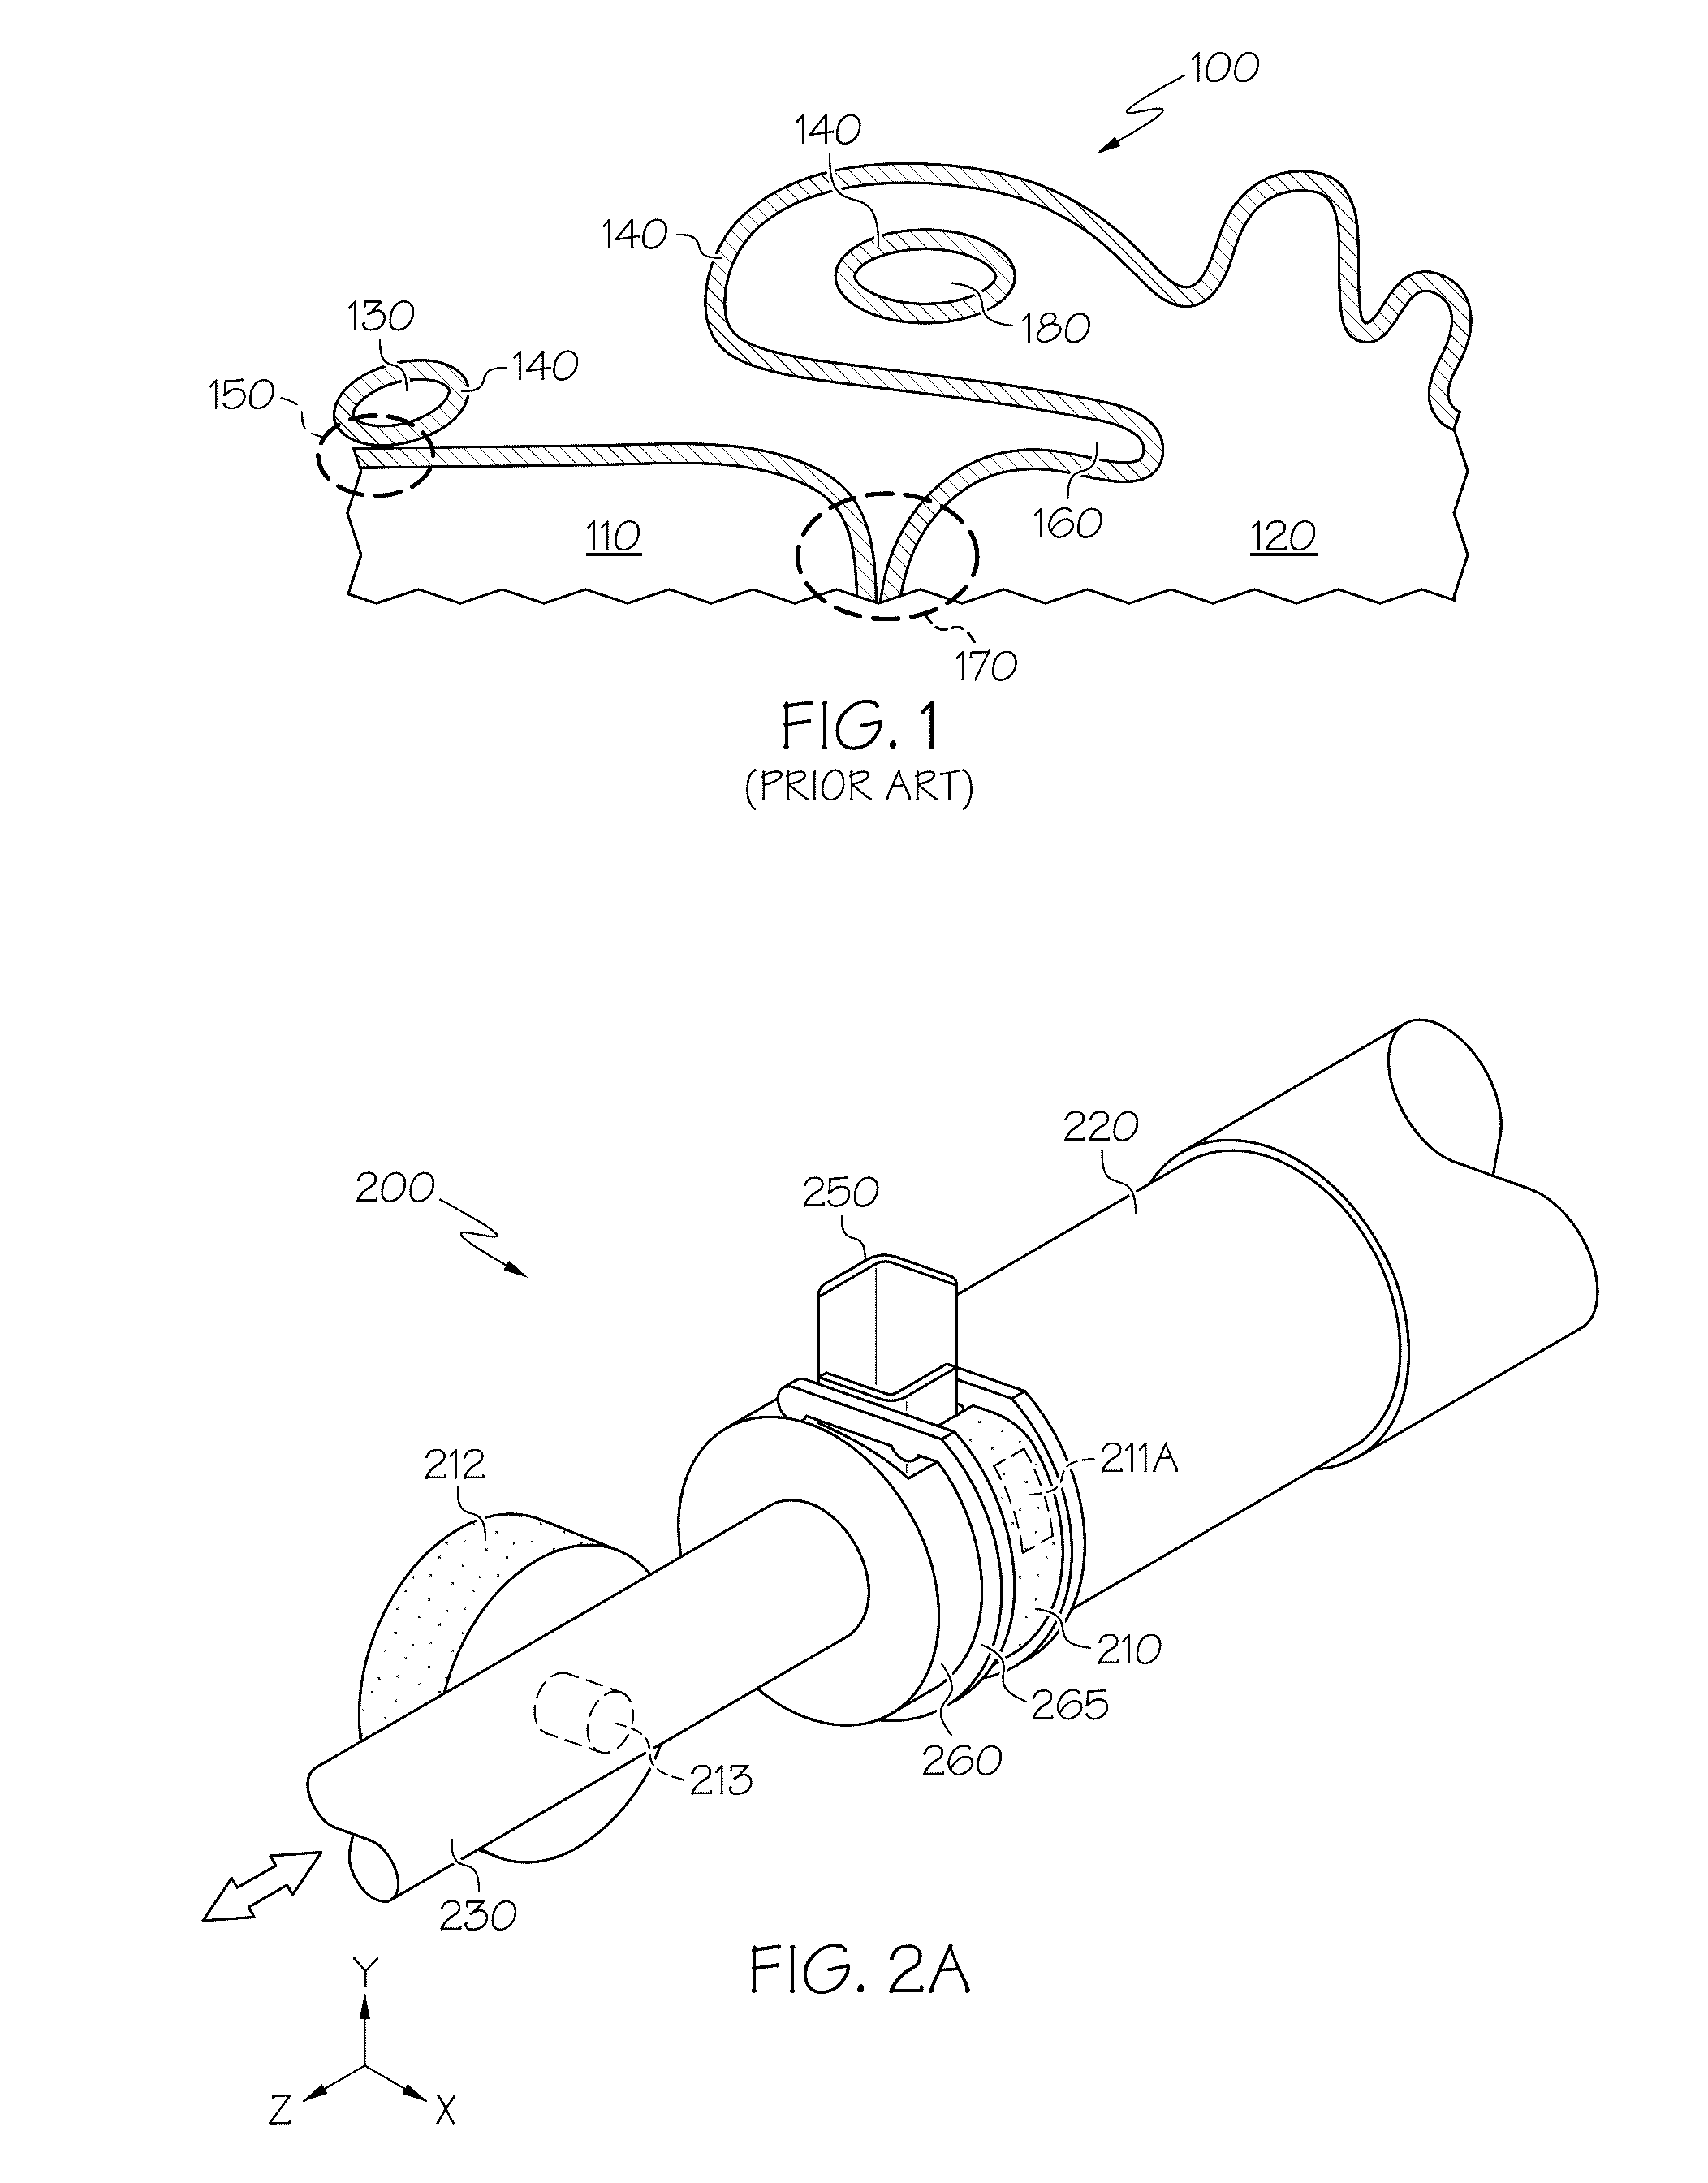 Device and method for filtering molten metal